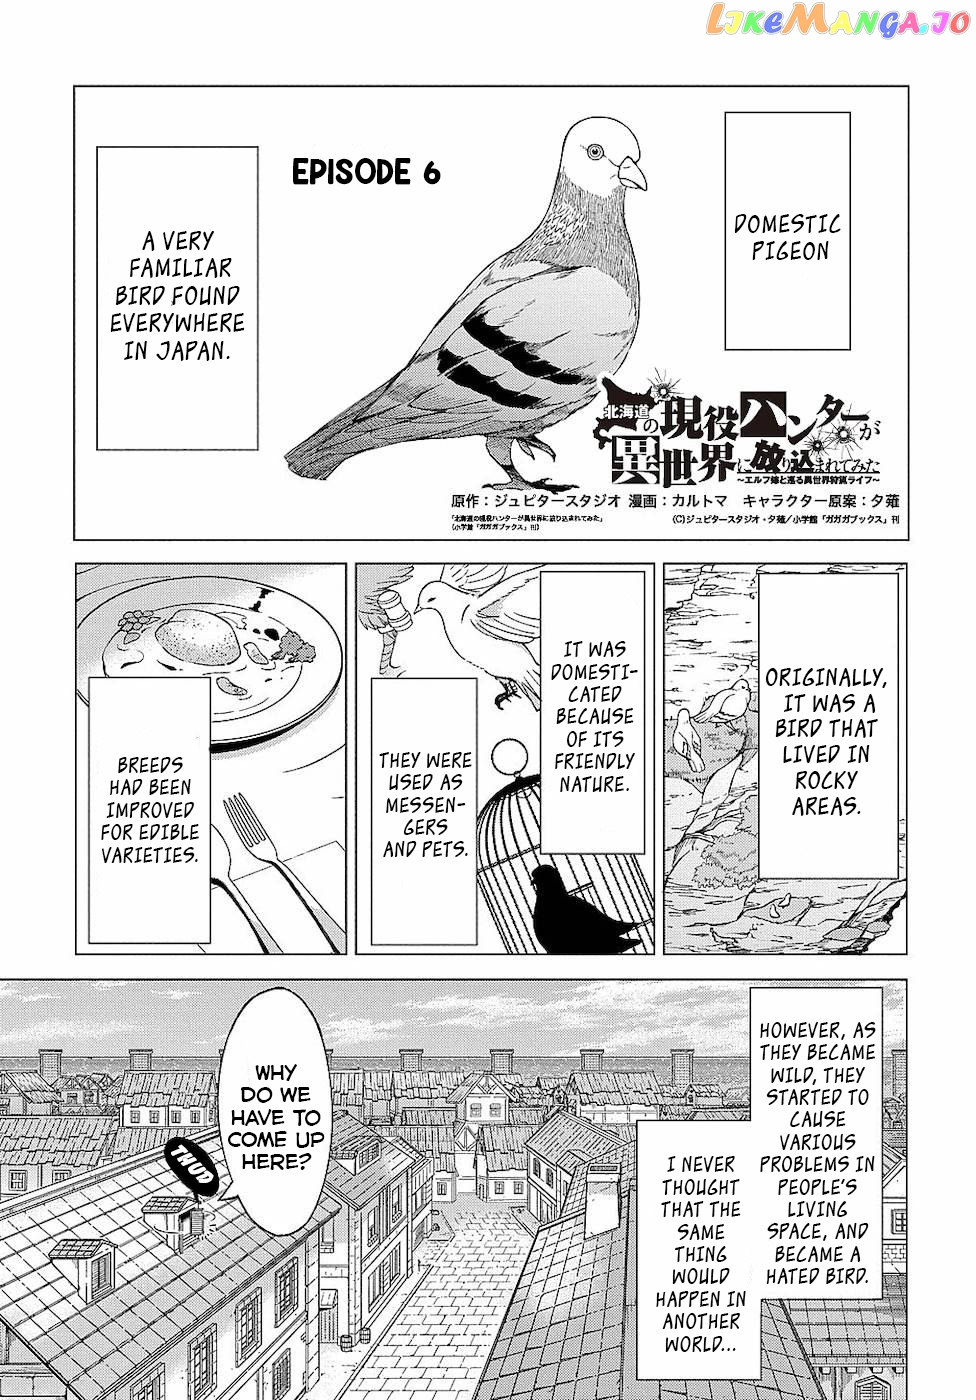 An Active Hunter In Hokkaido Has Been Thrown Into A Different World chapter 6 - page 2